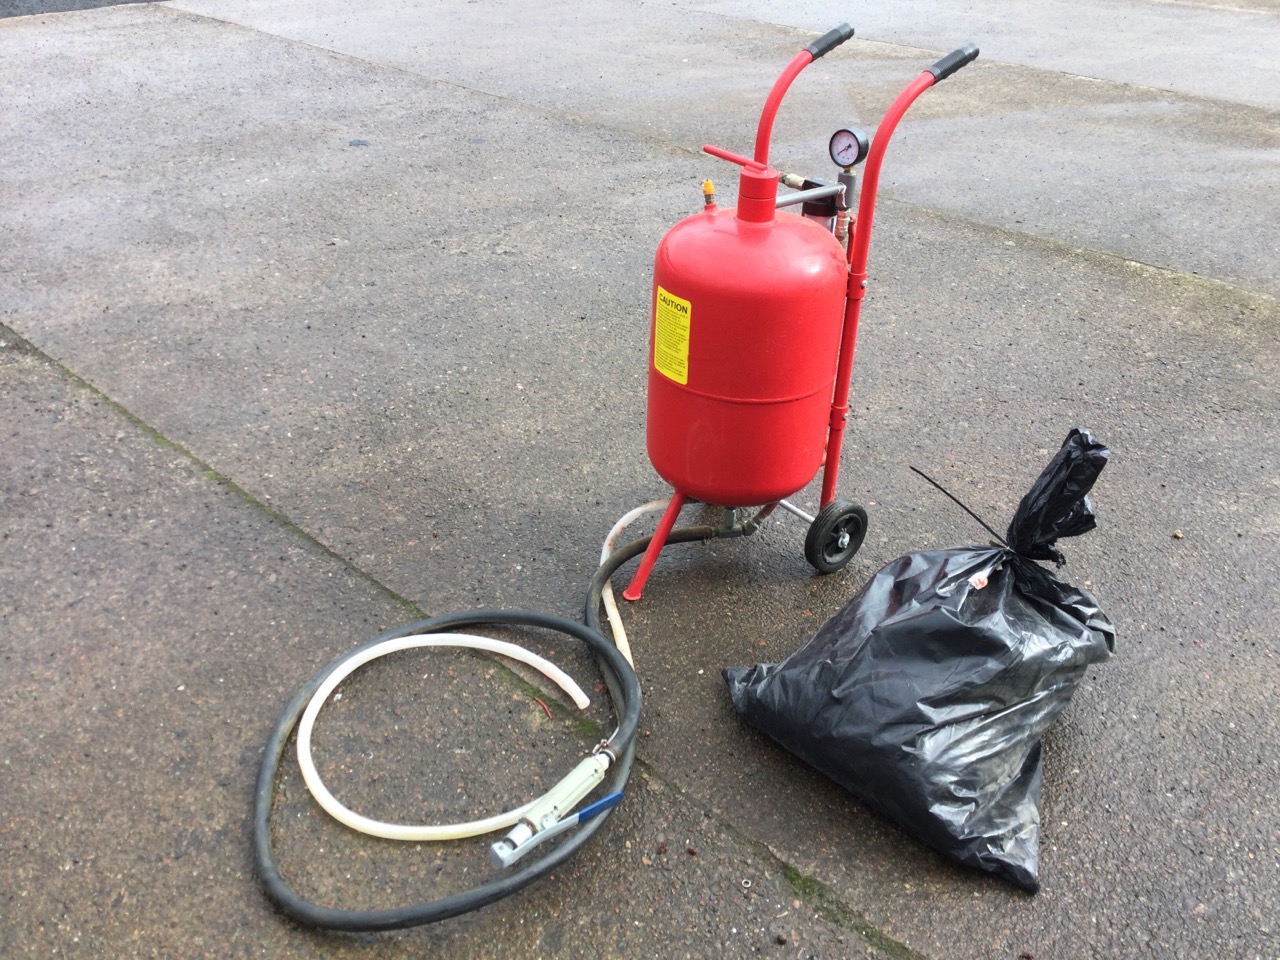 A 10 gallon pressurised sandblasting machine on trolley stand, complete with a bag of soda